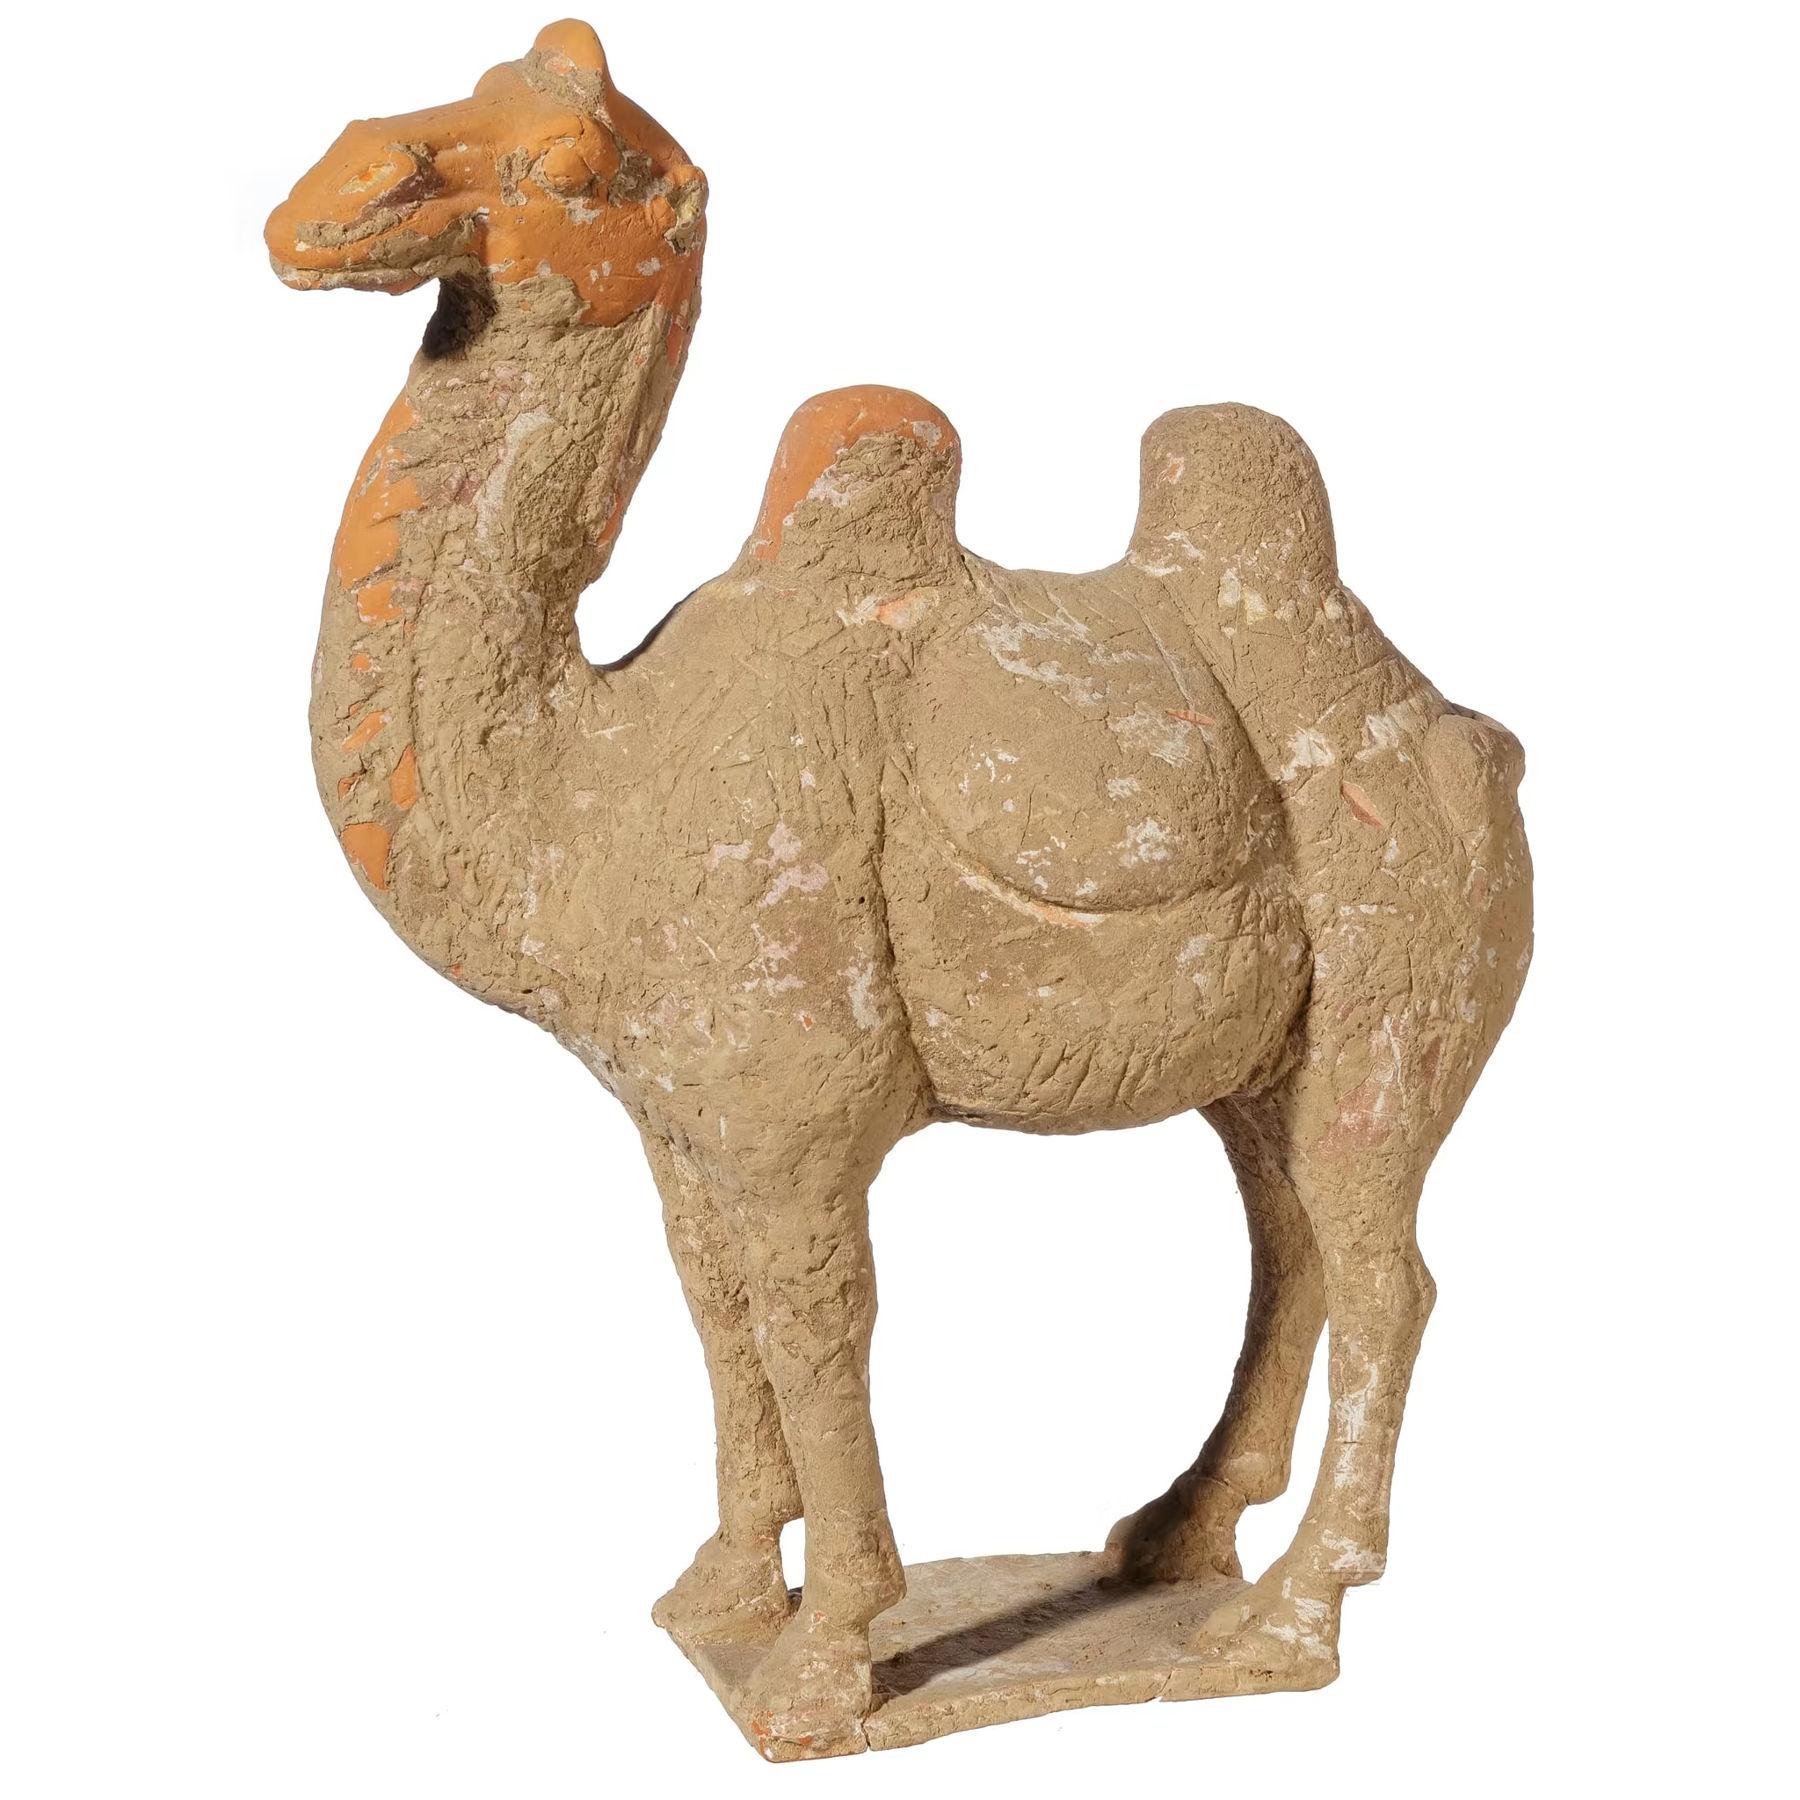 ITEM: Statuette of a camel
MATERIAL: Pottery
CULTURE: Chinese, Tang Dynasty
PERIOD: 618 – 907 A.D
DIMENSIONS: 340 mm x 260 mm
CONDITION: Good condition. Includes Thermoluminescence test by Laboratory Ralf Kotalla (Reference 06120909)
PROVENANCE: Ex